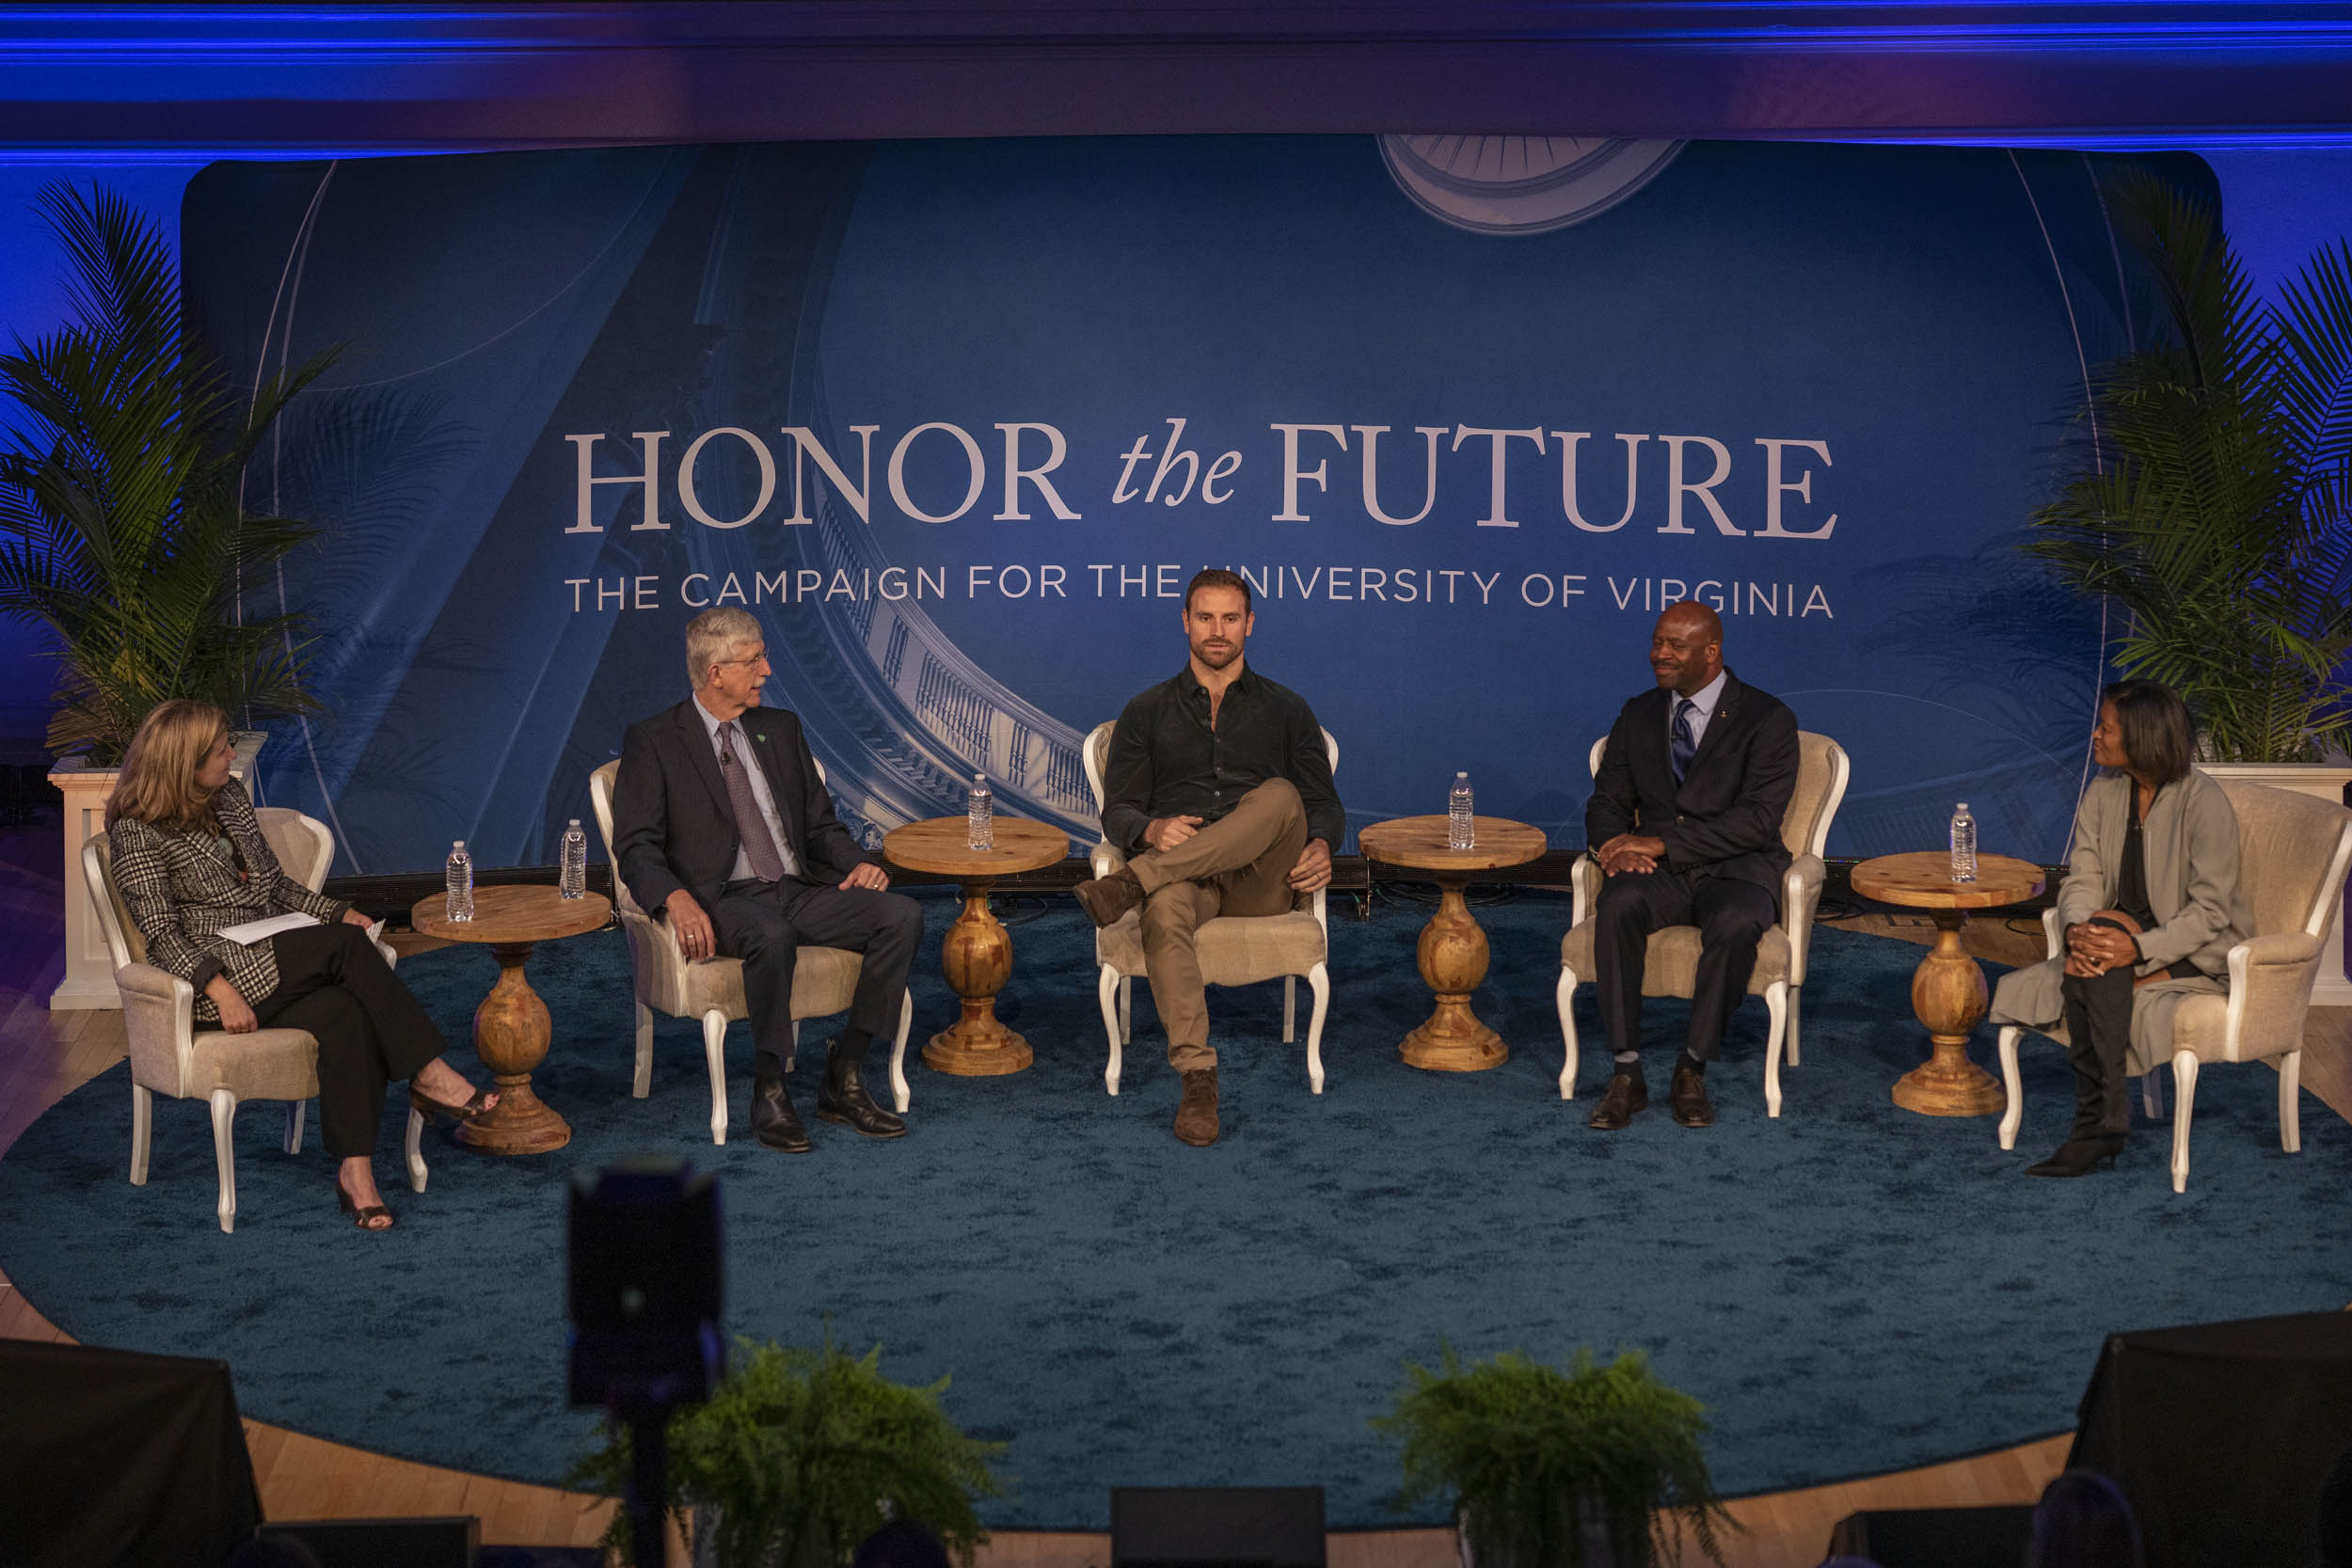 Panelists sit on the stage for the Honor the Future panel discussion